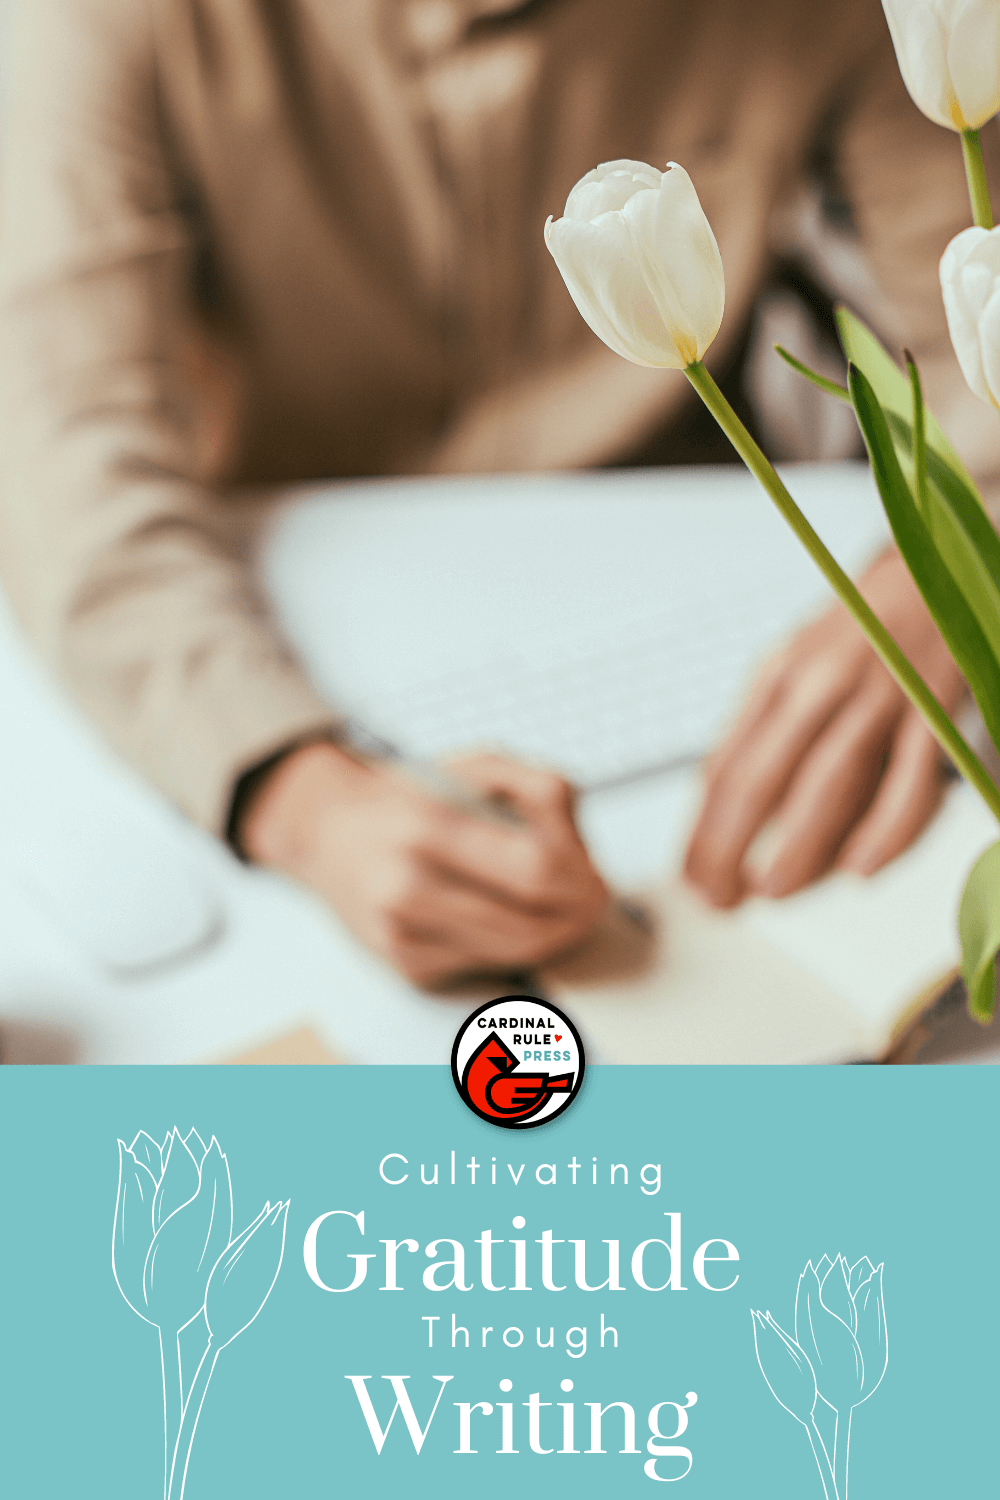 Cultivating Gratitude Through Writing. Writing-based activities designed to help you cultivate your own sense of gratitude. #Gratitude #Writing #ForWriters